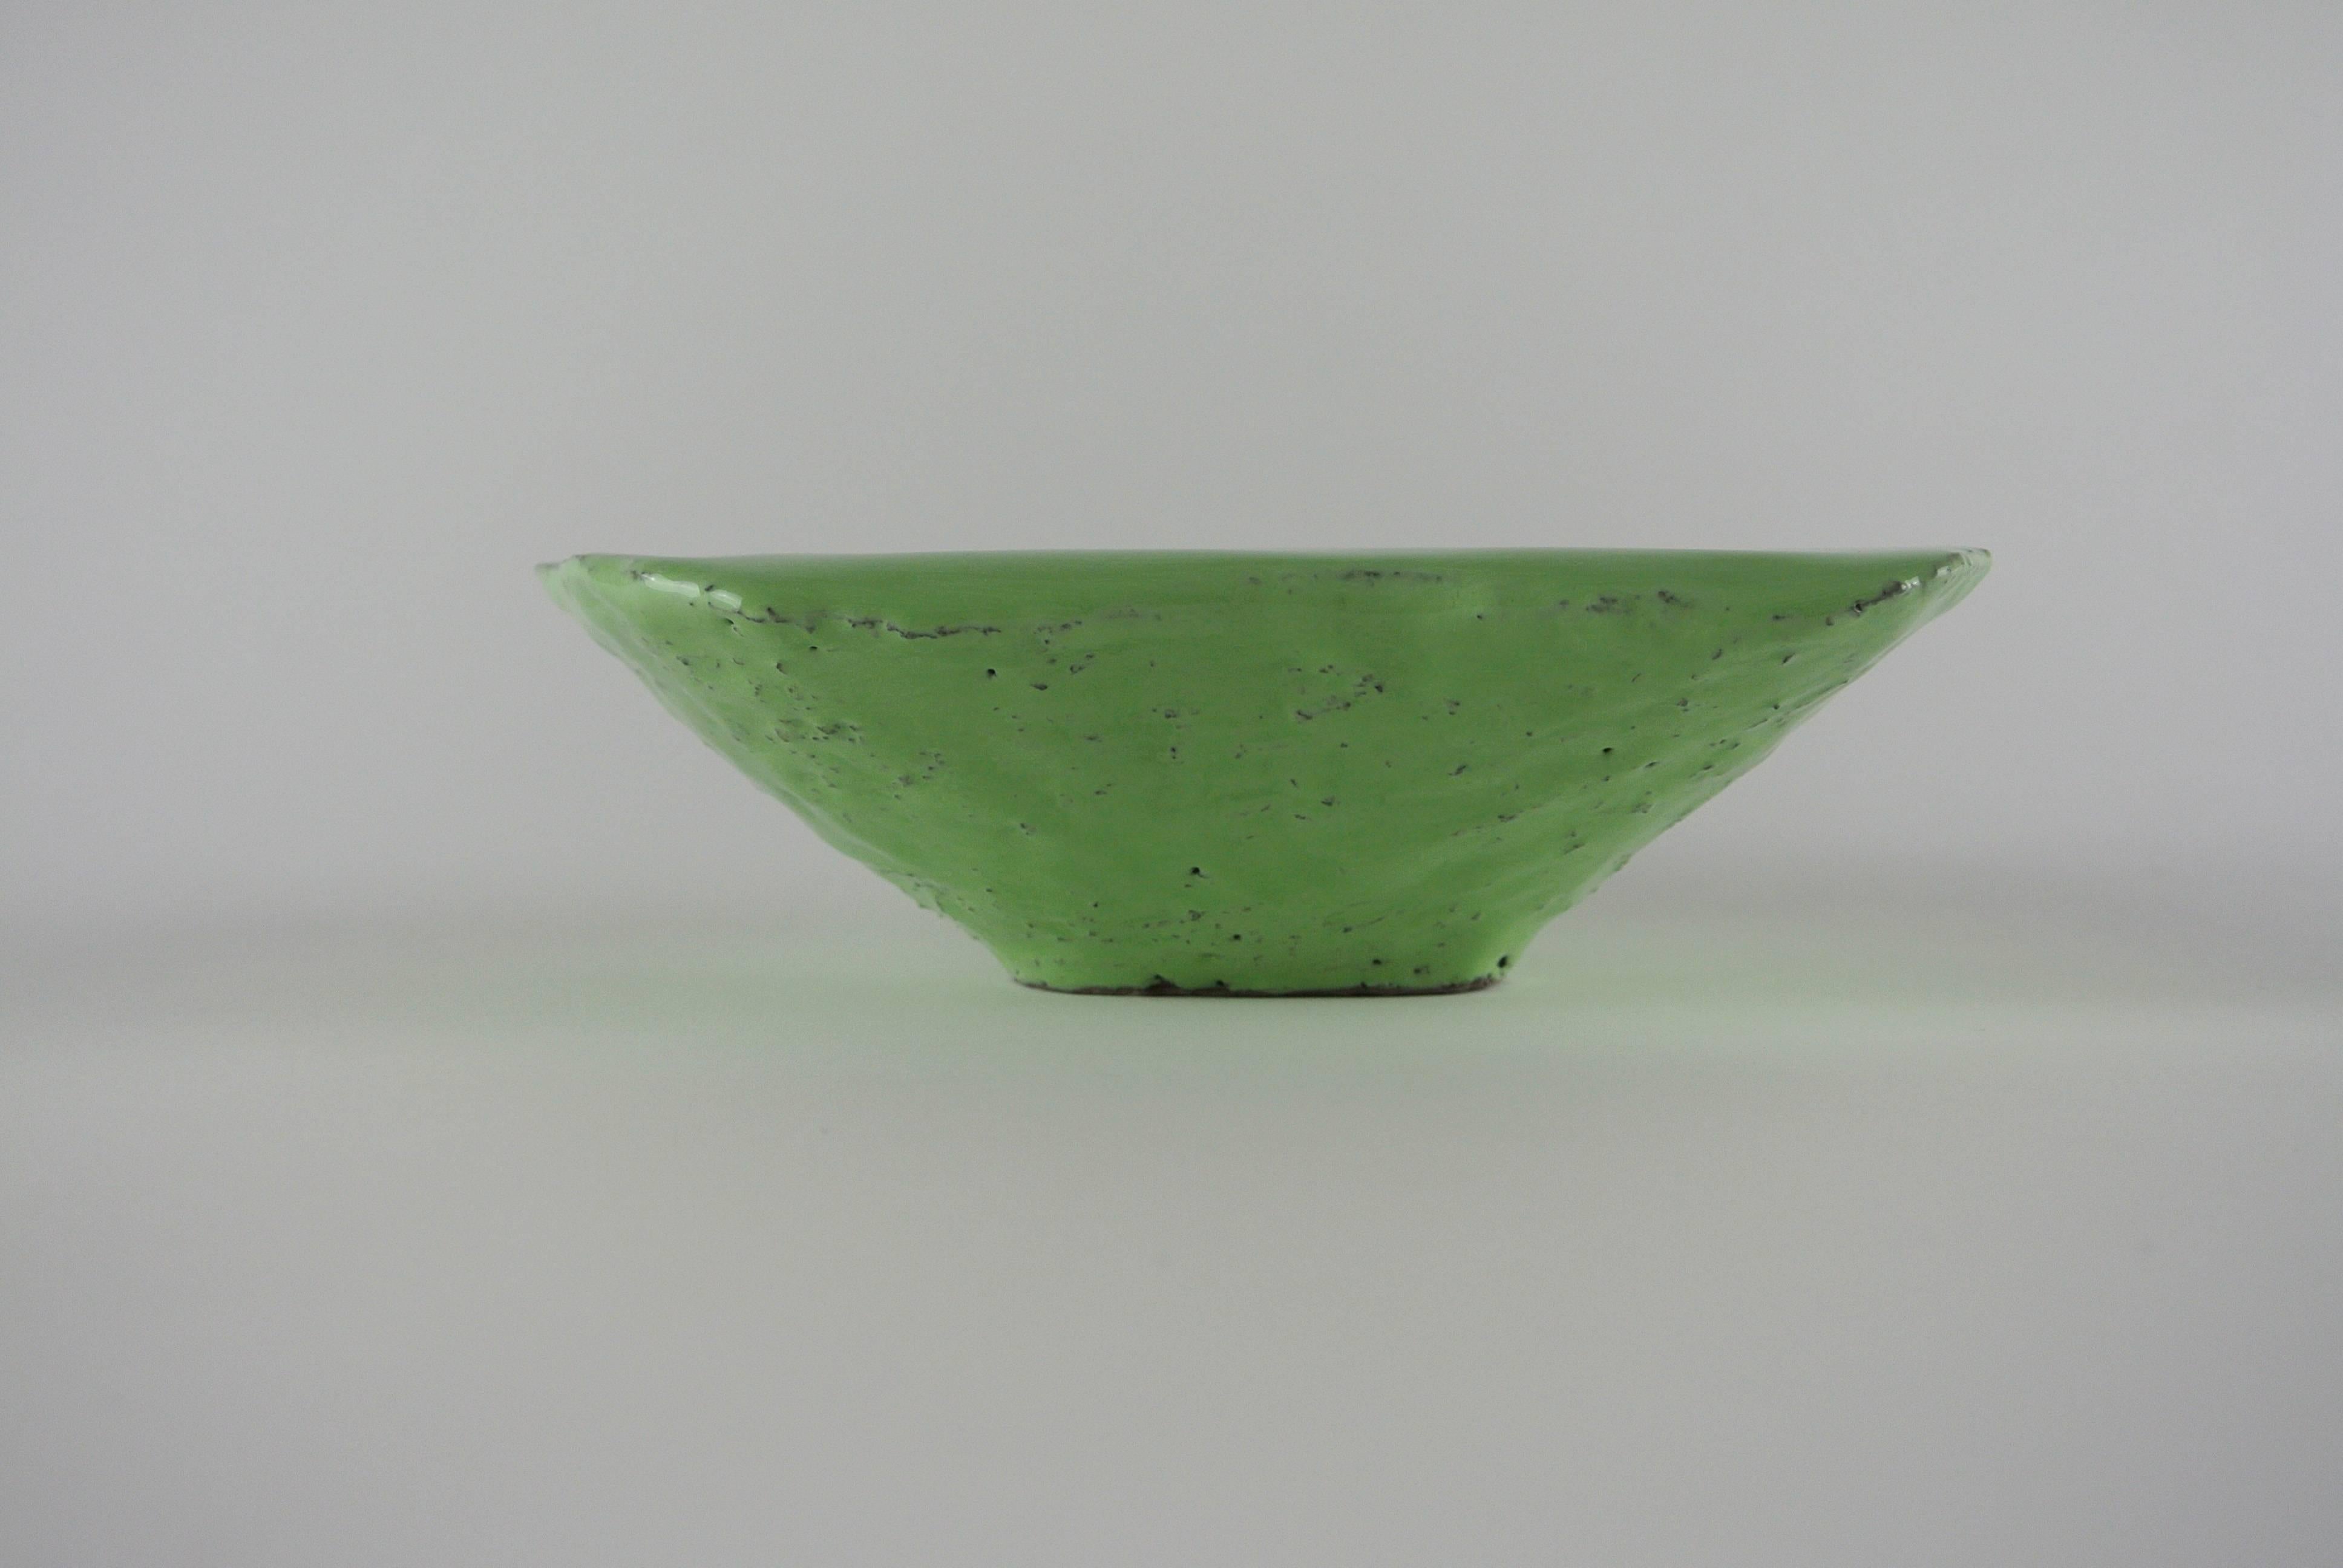 Asymmetric grey stoneware platform with visible black fire sand on parts of the surface. Lichen green glossy glaze. Crater like dent on one side.
Decorative.